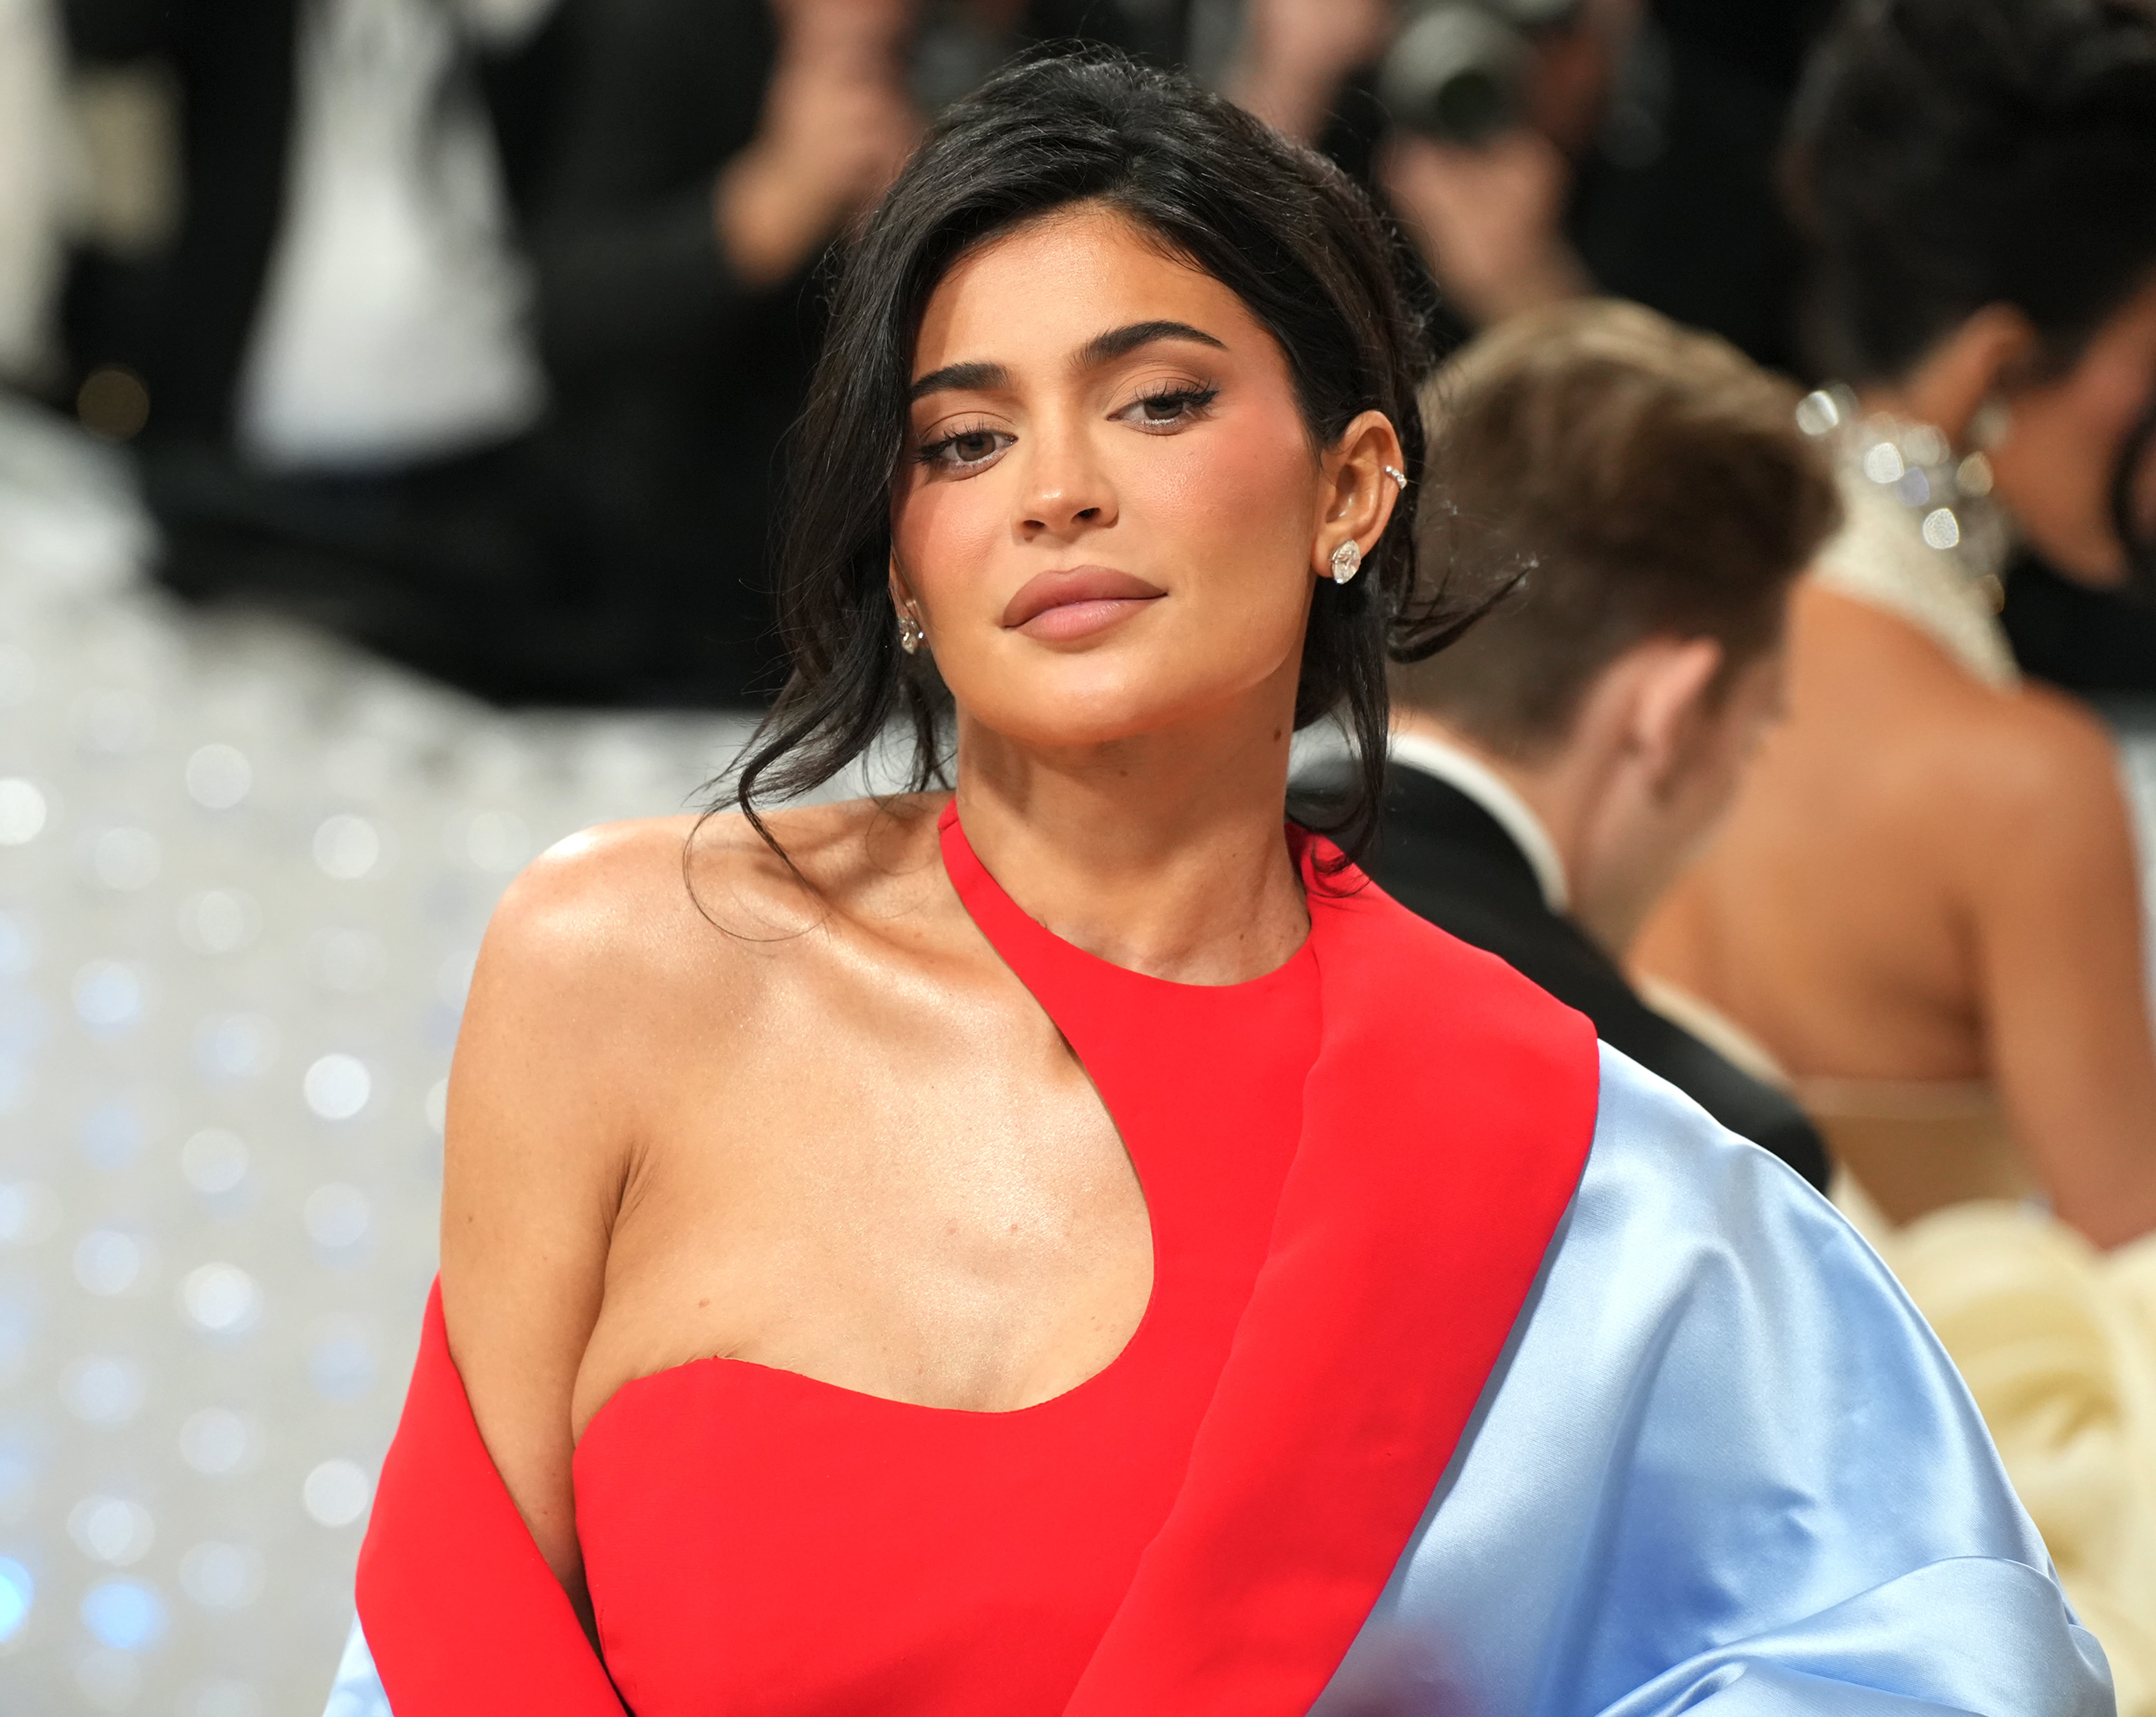 Kylie Jenner Gives Casual Chic Clothing A Whole New Stylish Meaning